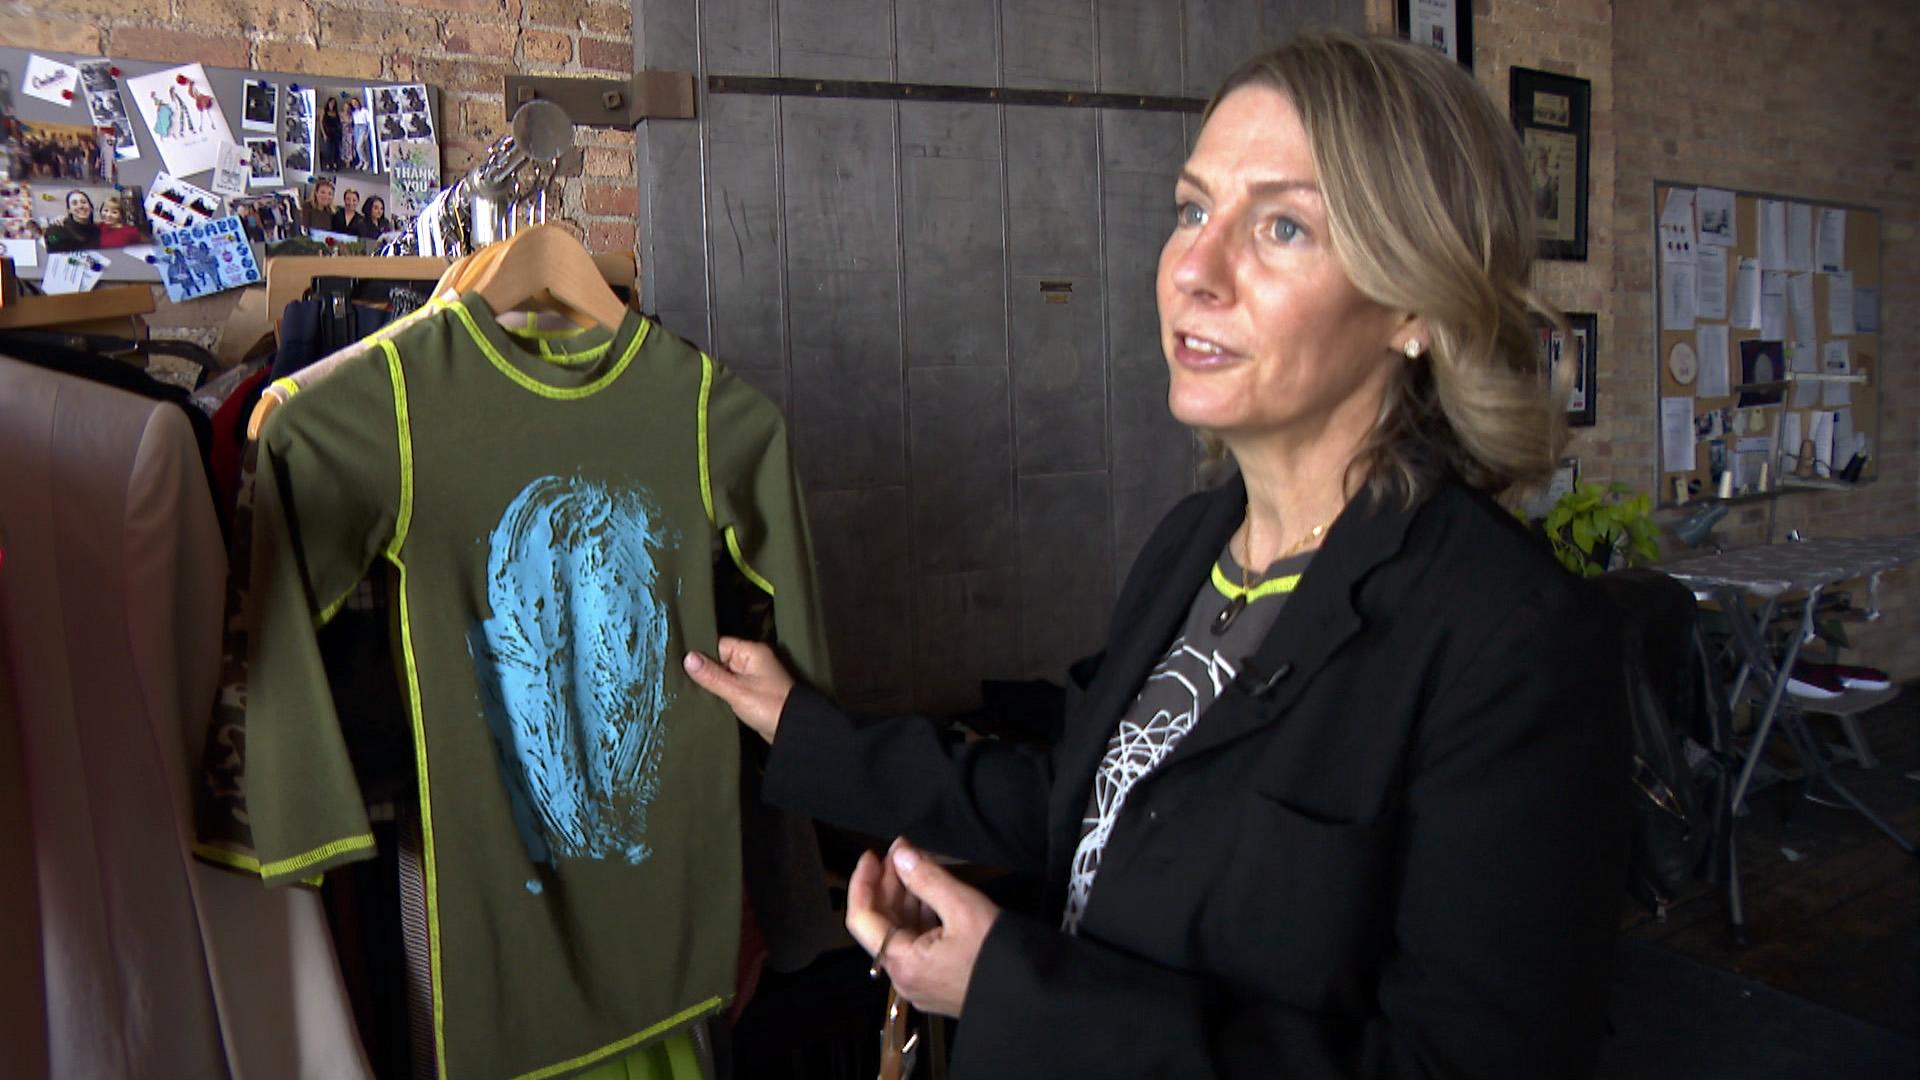 Minor Details founder Dina Lewis shows off her “squeeze tee,” designed to fit comfortably on children with sensory processing disorder, in her design studio on April 15, 2021. (WTTW News)